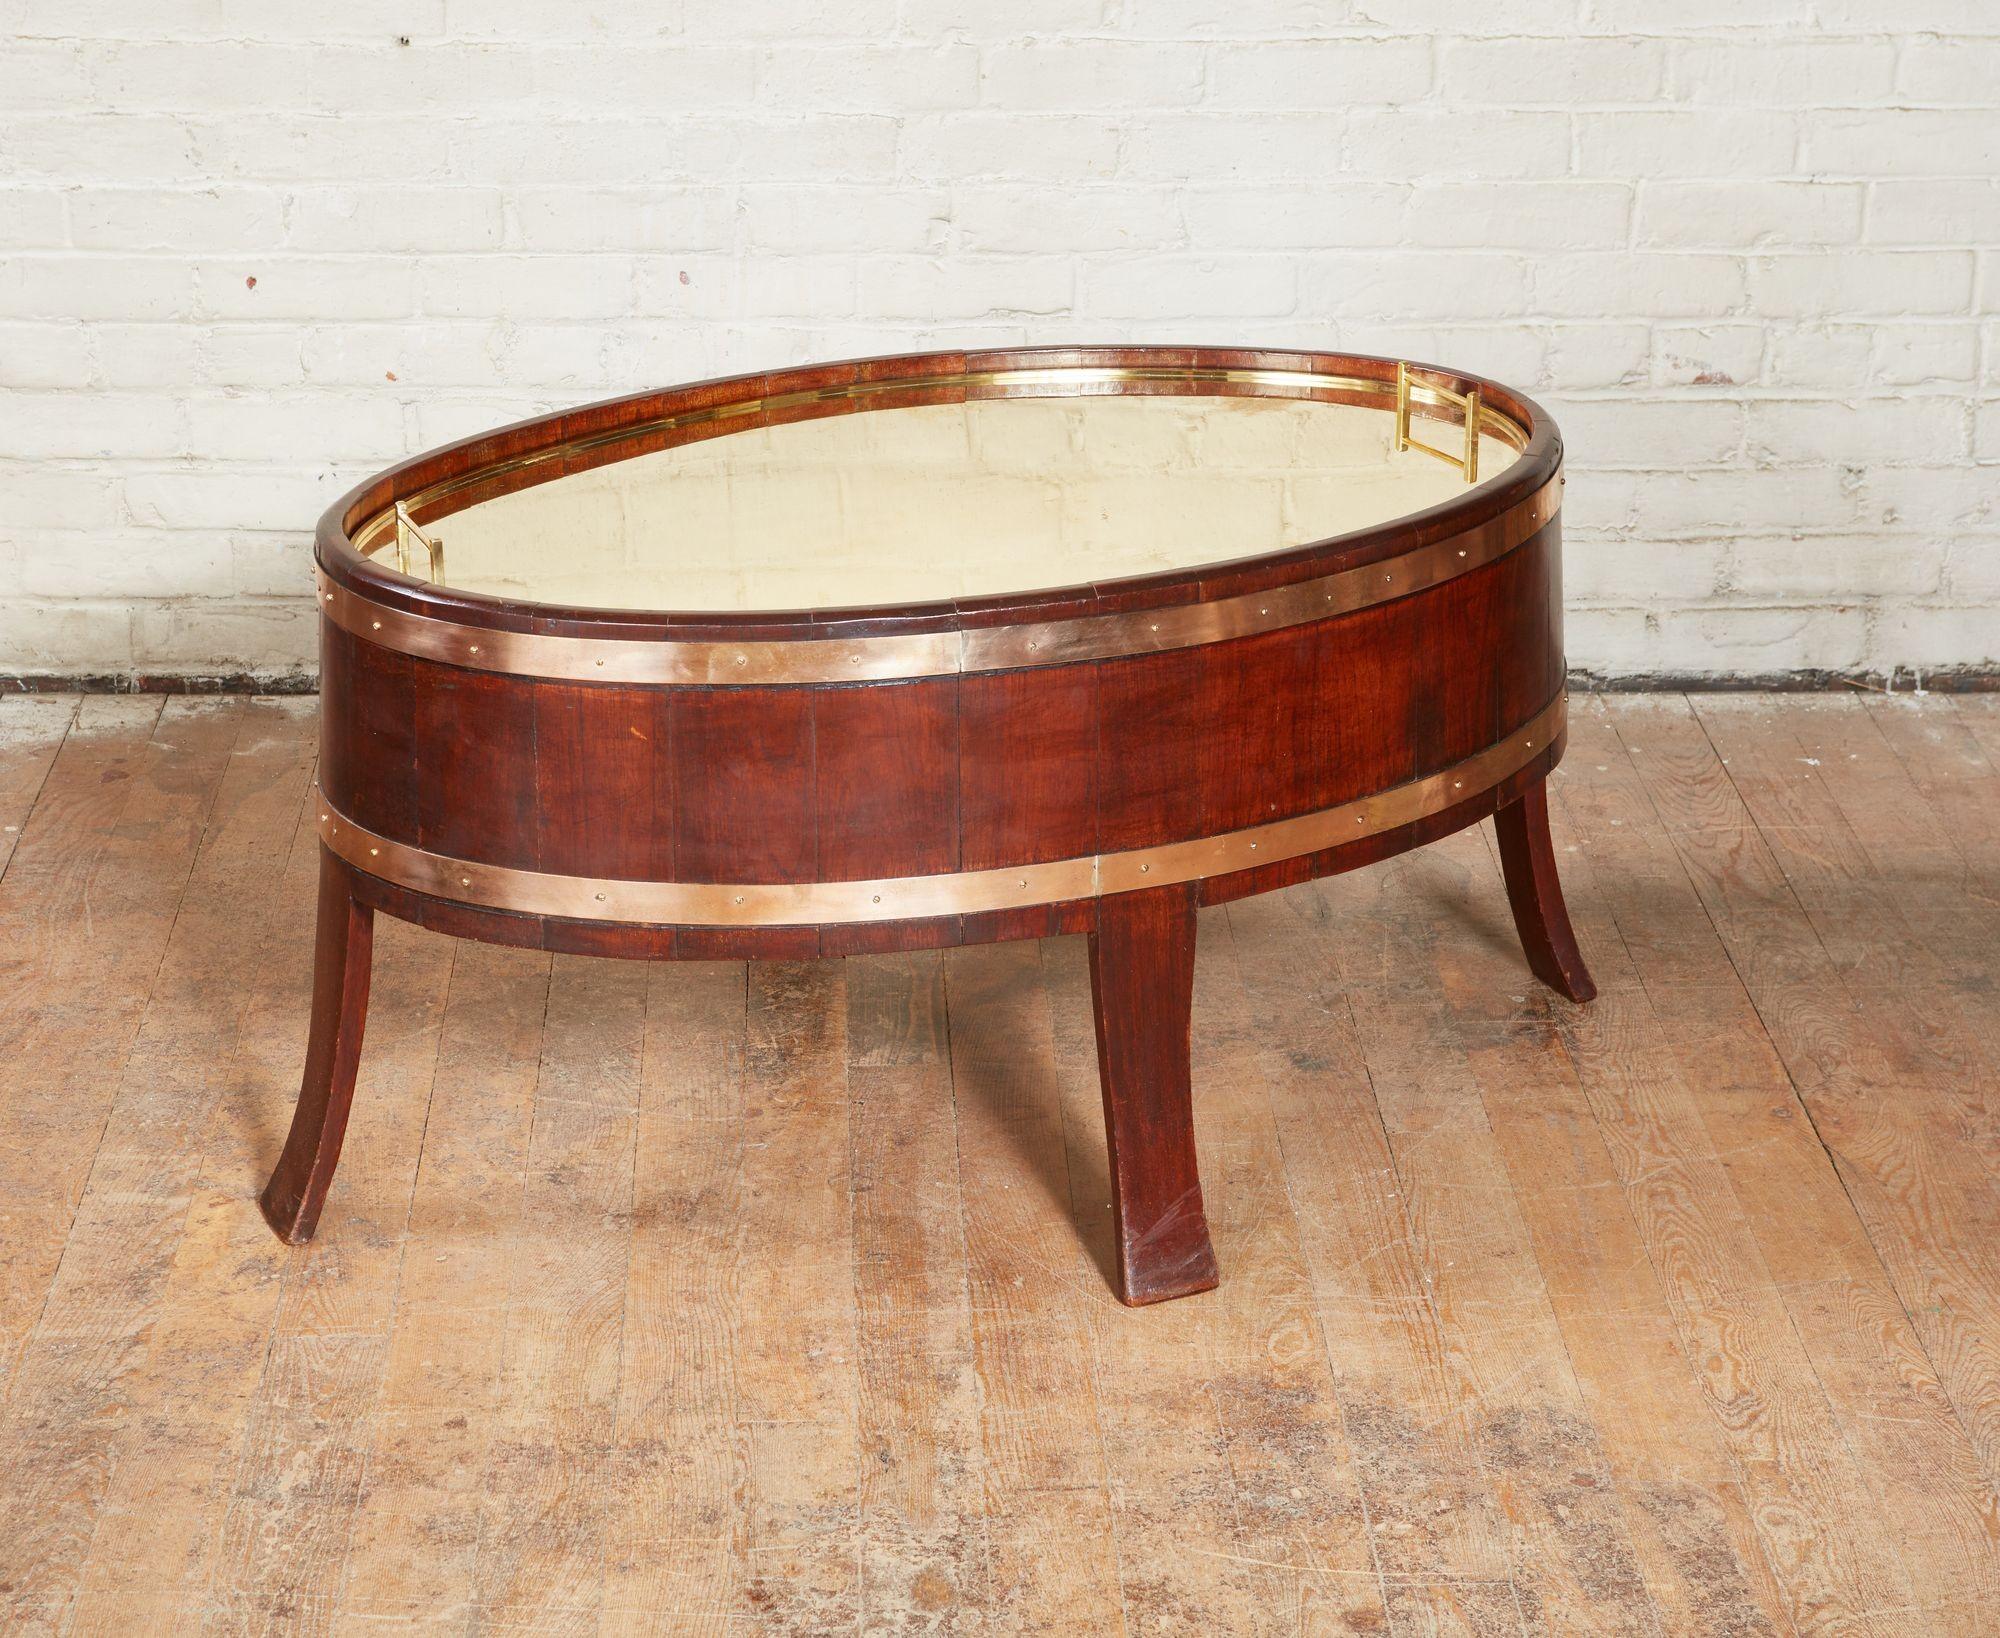 Good early 20th century teak wine cooler/coffee table of oval form, with barrel stave construction and heavy gauge brass banding, having splayed legs and now with fine quality custom brass lid, the whole with good color and patination.